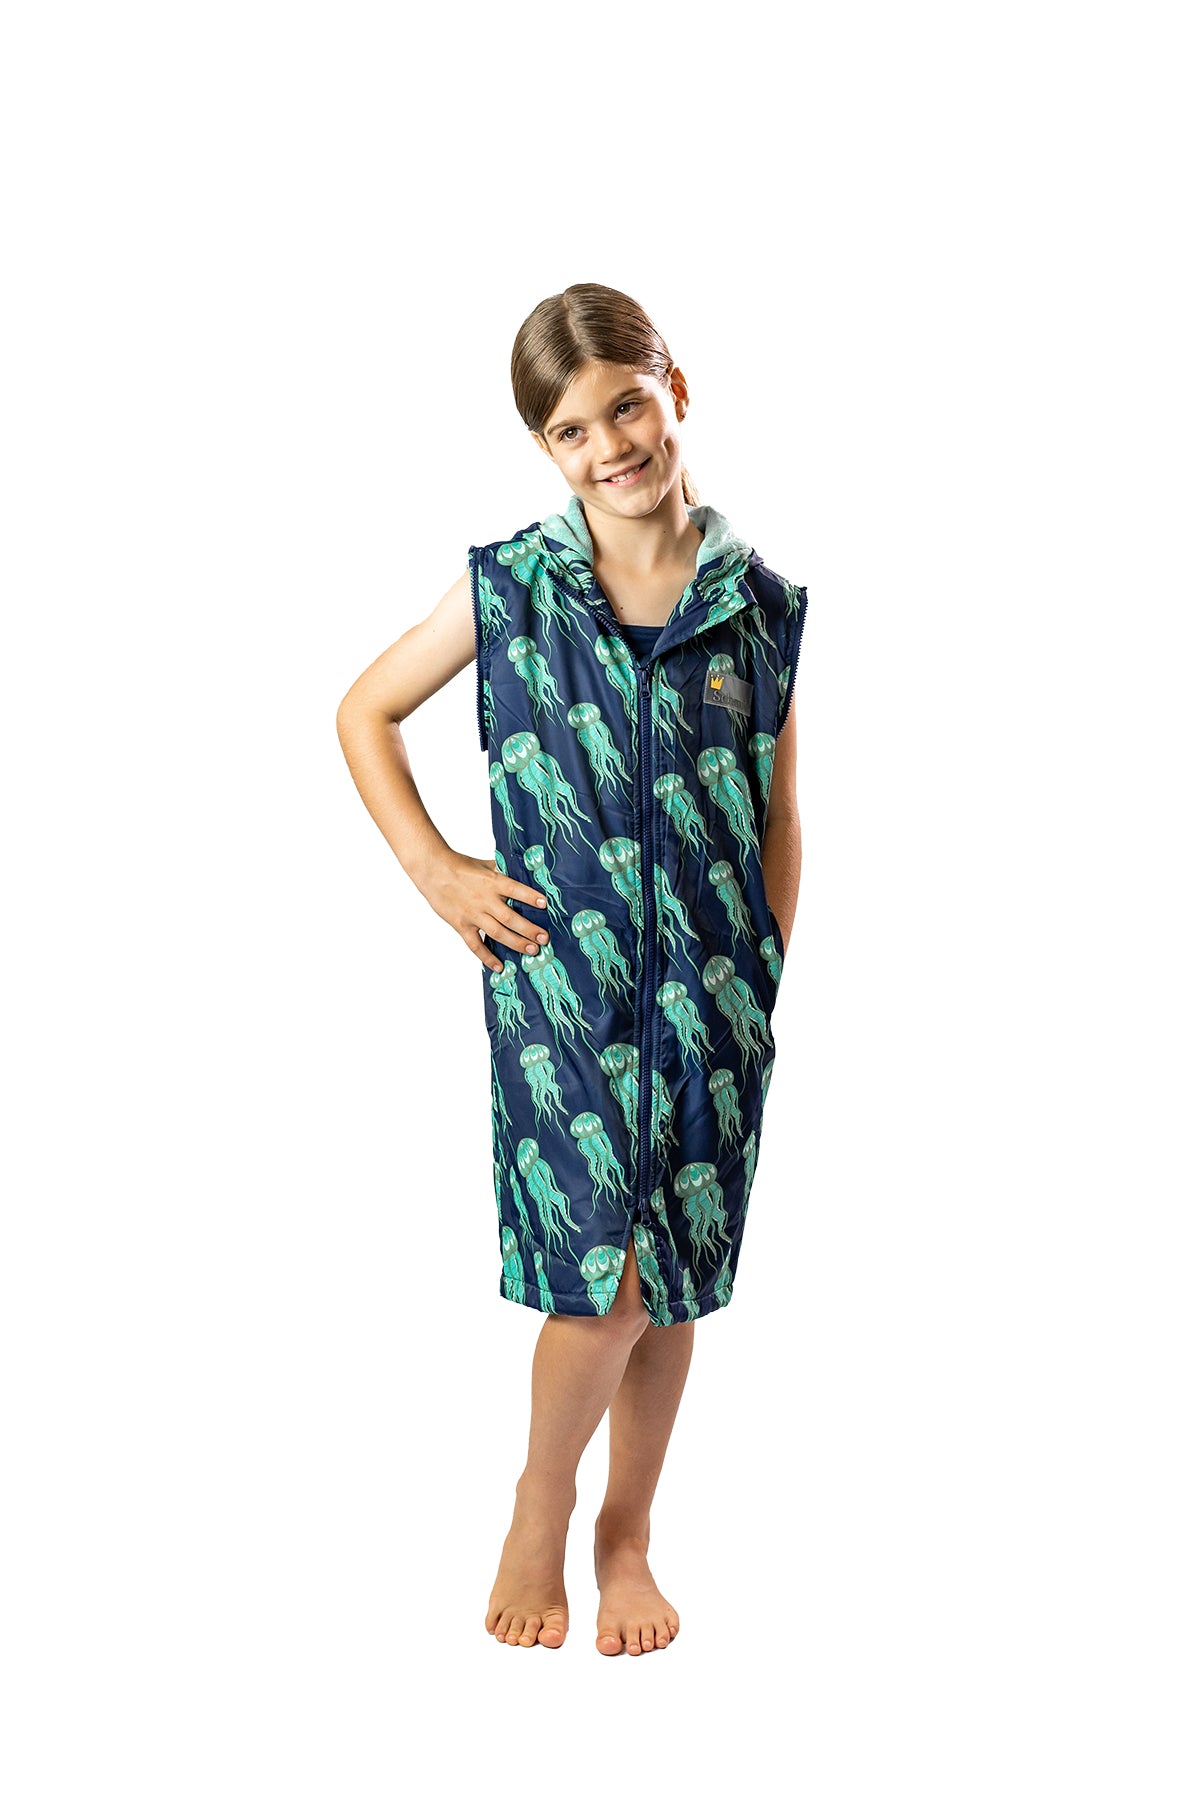 Child smiling, standing up wearing a schmik swim parka in jellyfish print. Swim parka has the arms removed. 